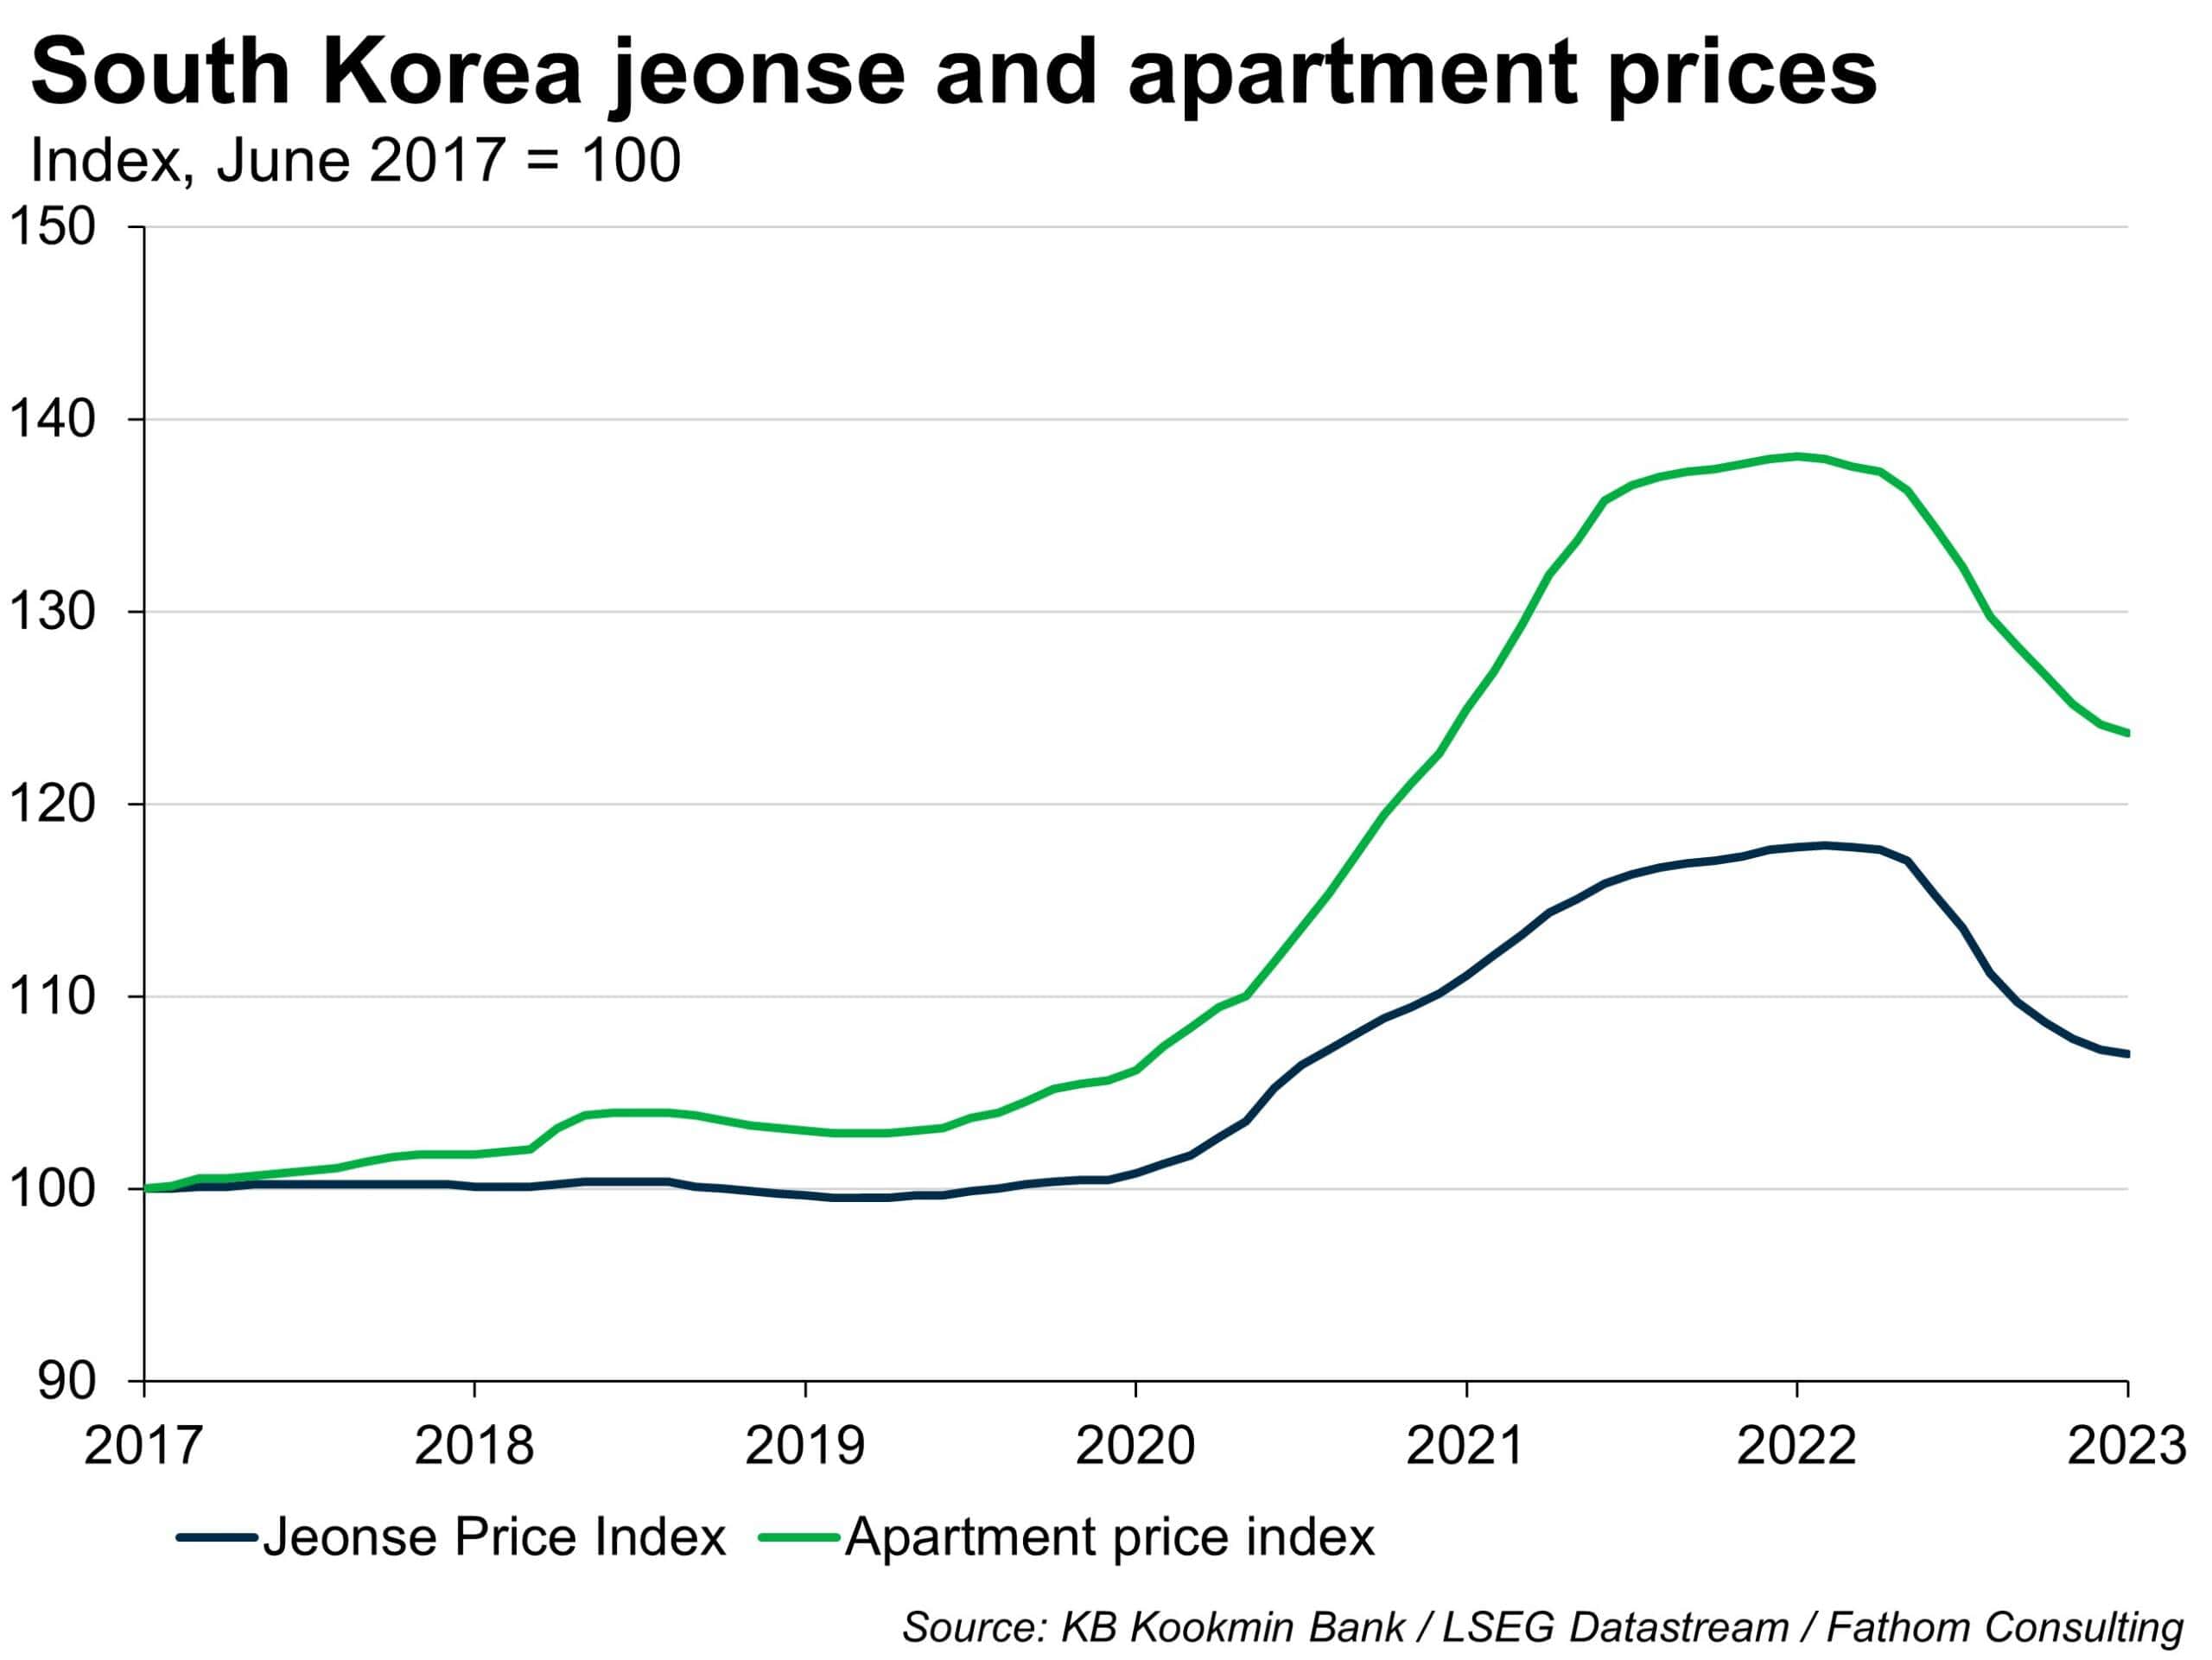 Korea's jeonse system for renting property is under acute strain